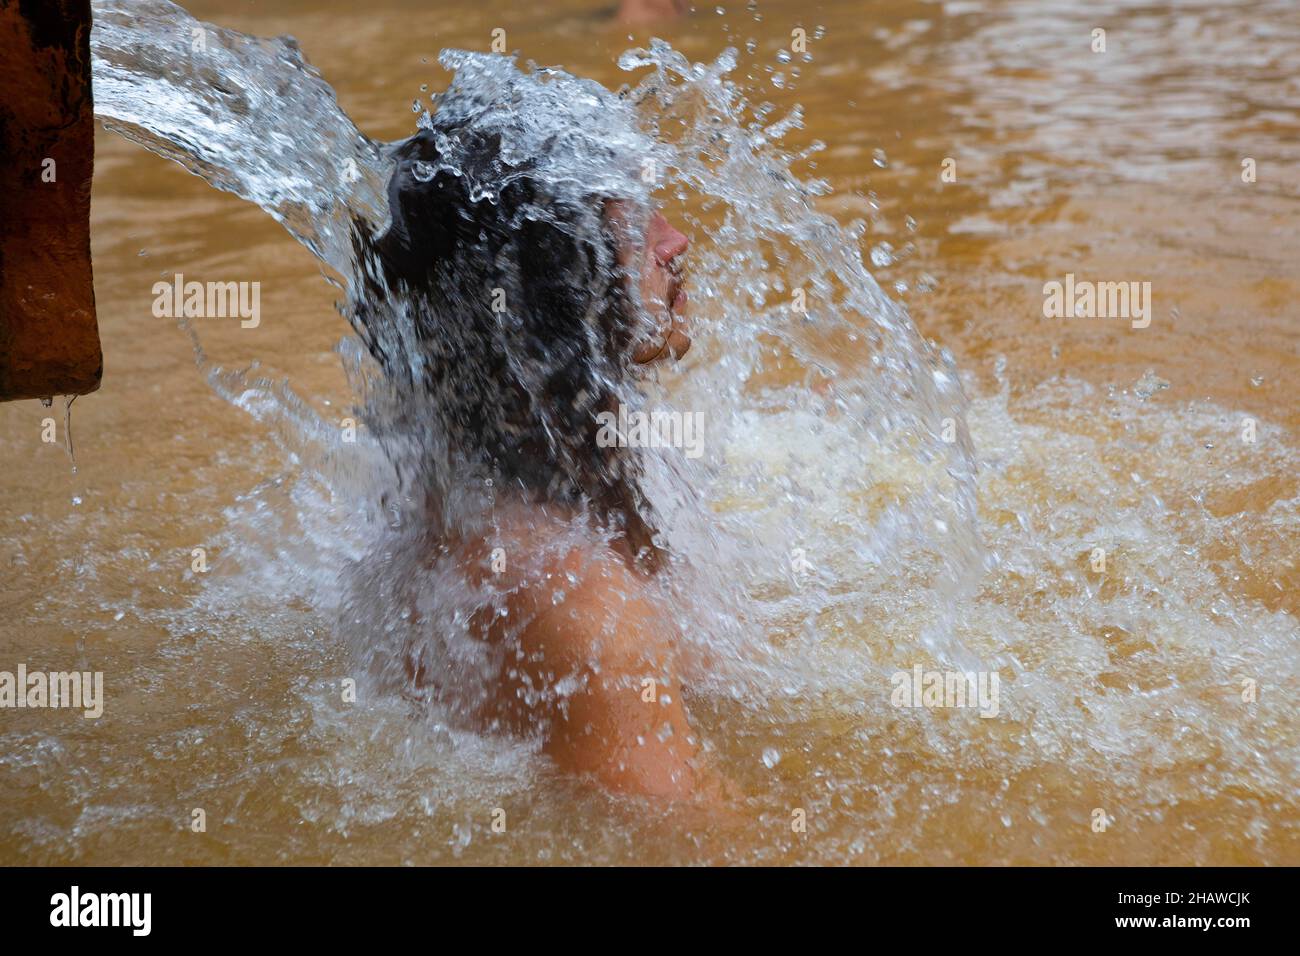 Botanical garden, man under water jet in thermal water pool in Terra Nostra Park, Furnas, Sao Miguel Island, Azores, Portugal Stock Photo